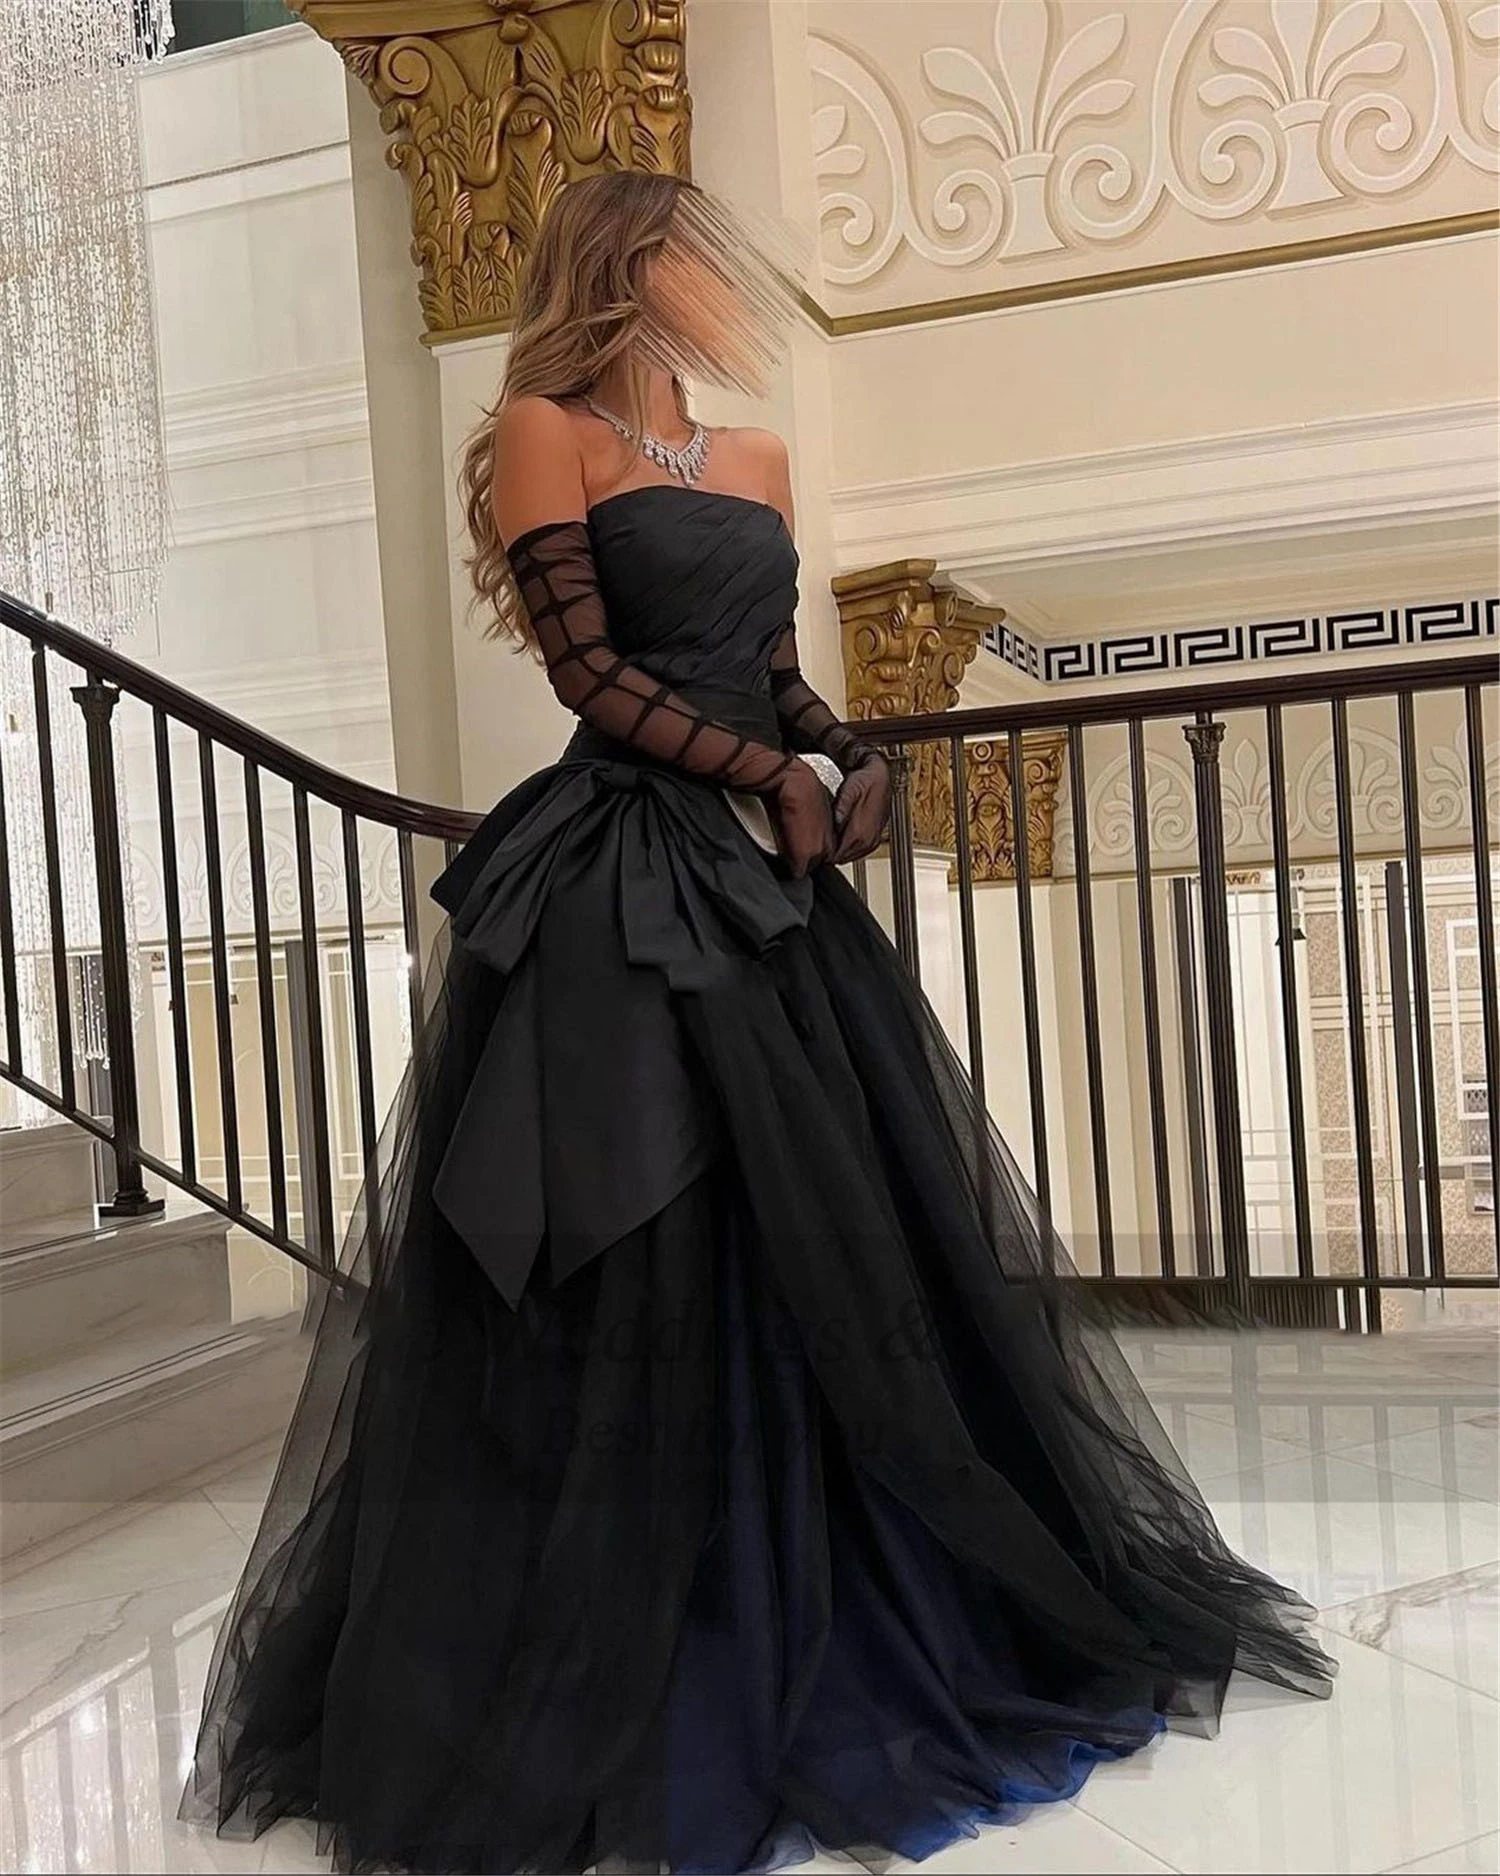 

Welove Black Saudi Arabia Prom Dresses Tulle Satin Pleats Bow Evening Gowns Strapless Formal Wedding Party Bridesmaid Dress